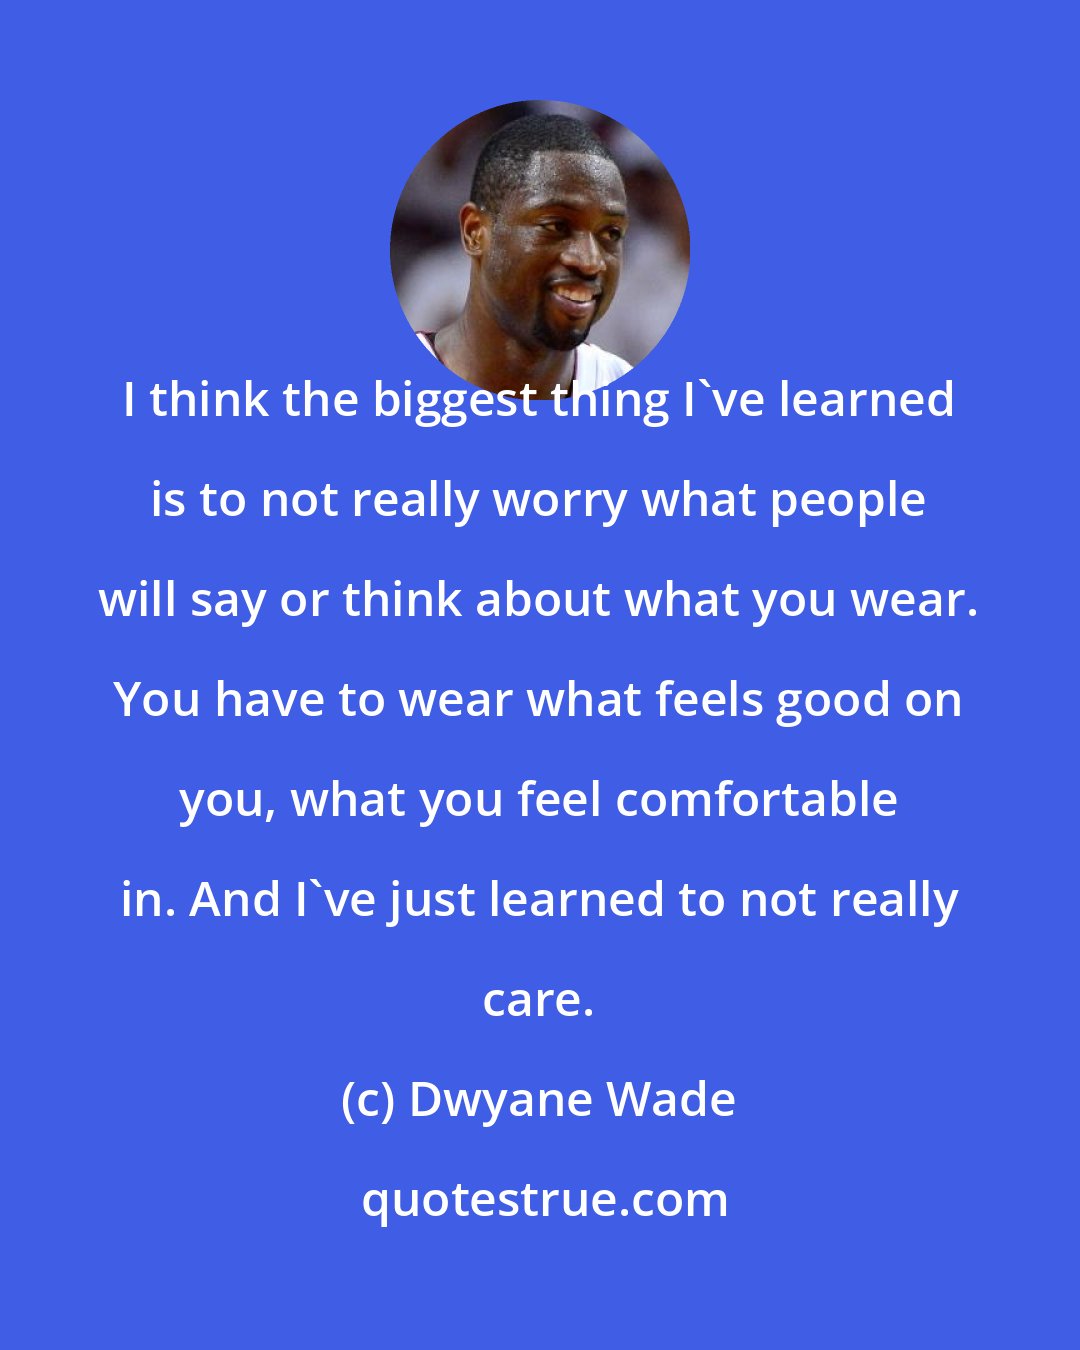 Dwyane Wade: I think the biggest thing I've learned is to not really worry what people will say or think about what you wear. You have to wear what feels good on you, what you feel comfortable in. And I've just learned to not really care.